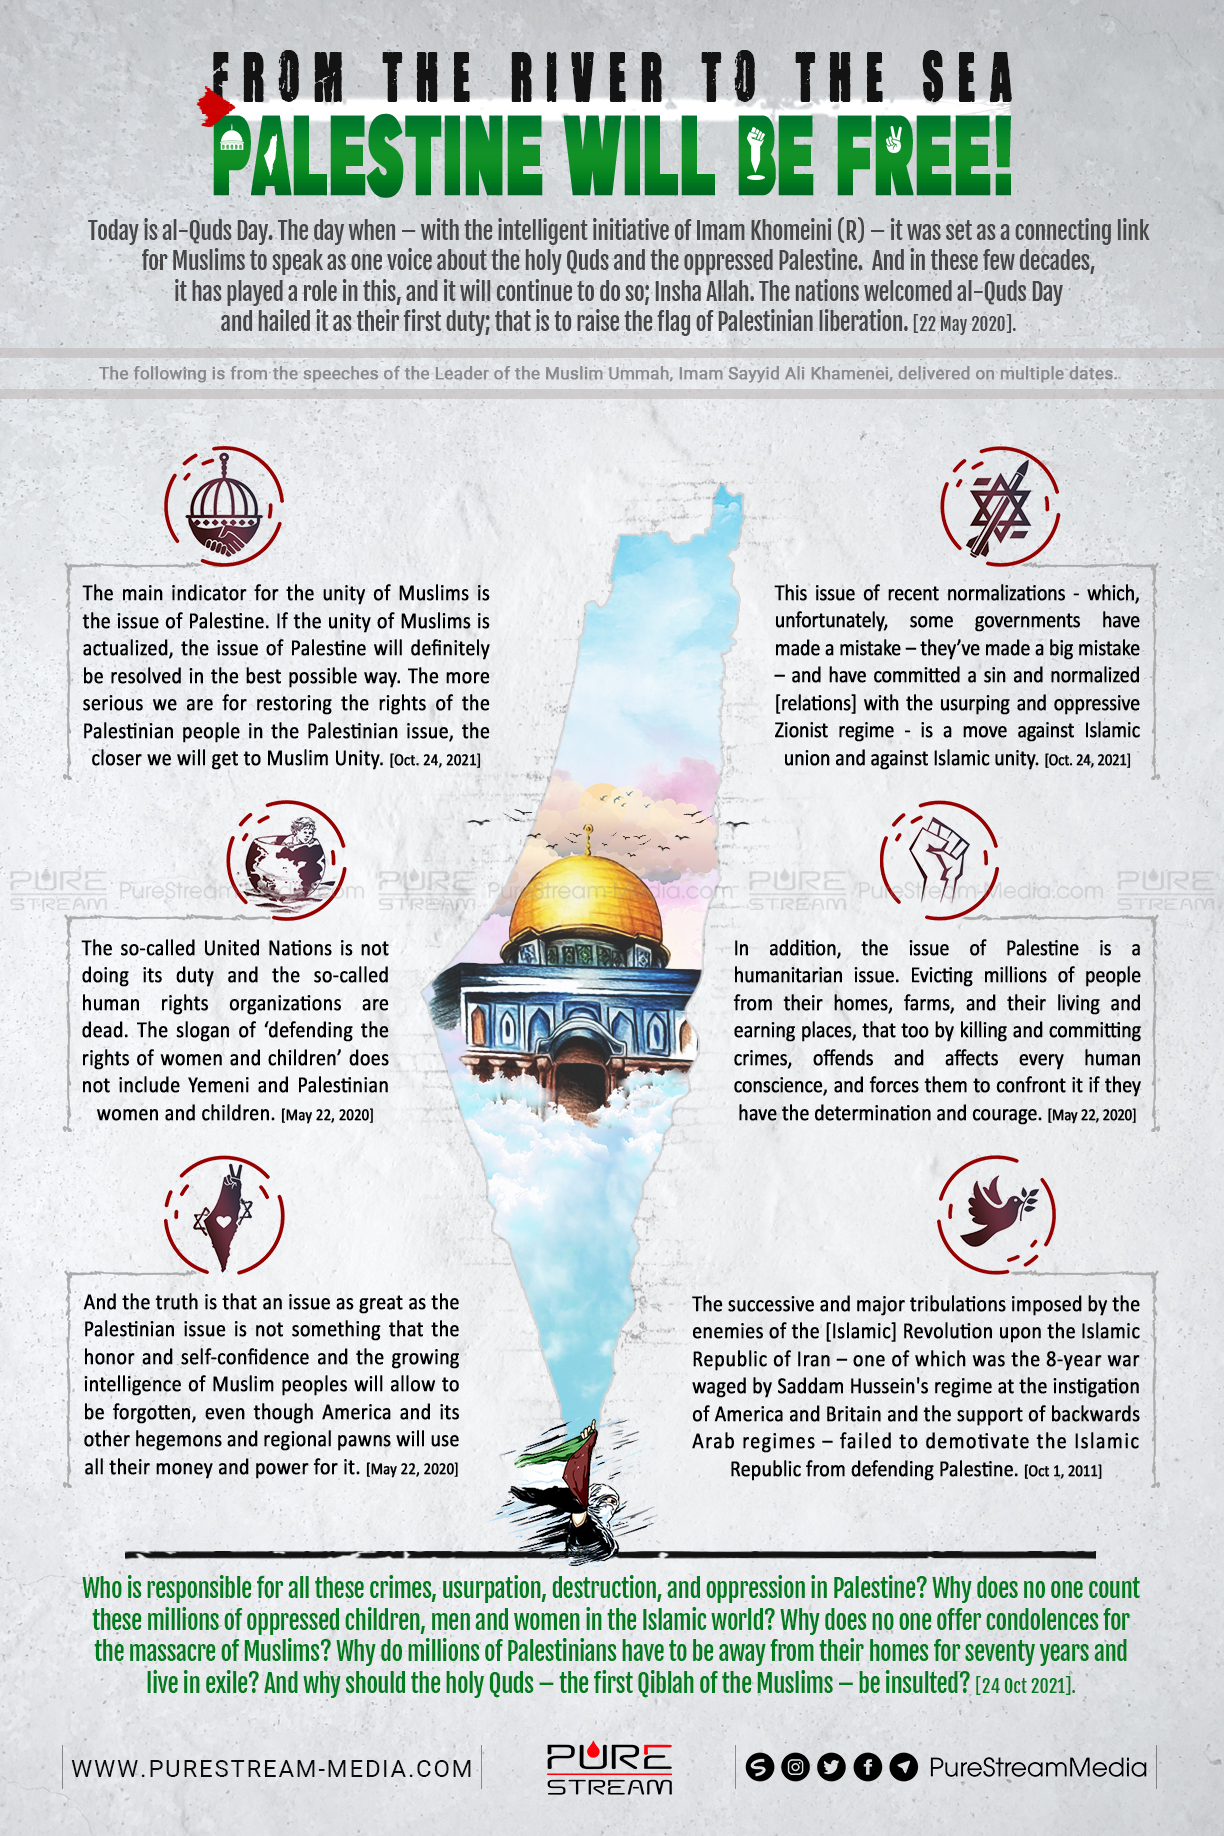 From the River to the Sea, Palestine Will Be Free! | Infographic